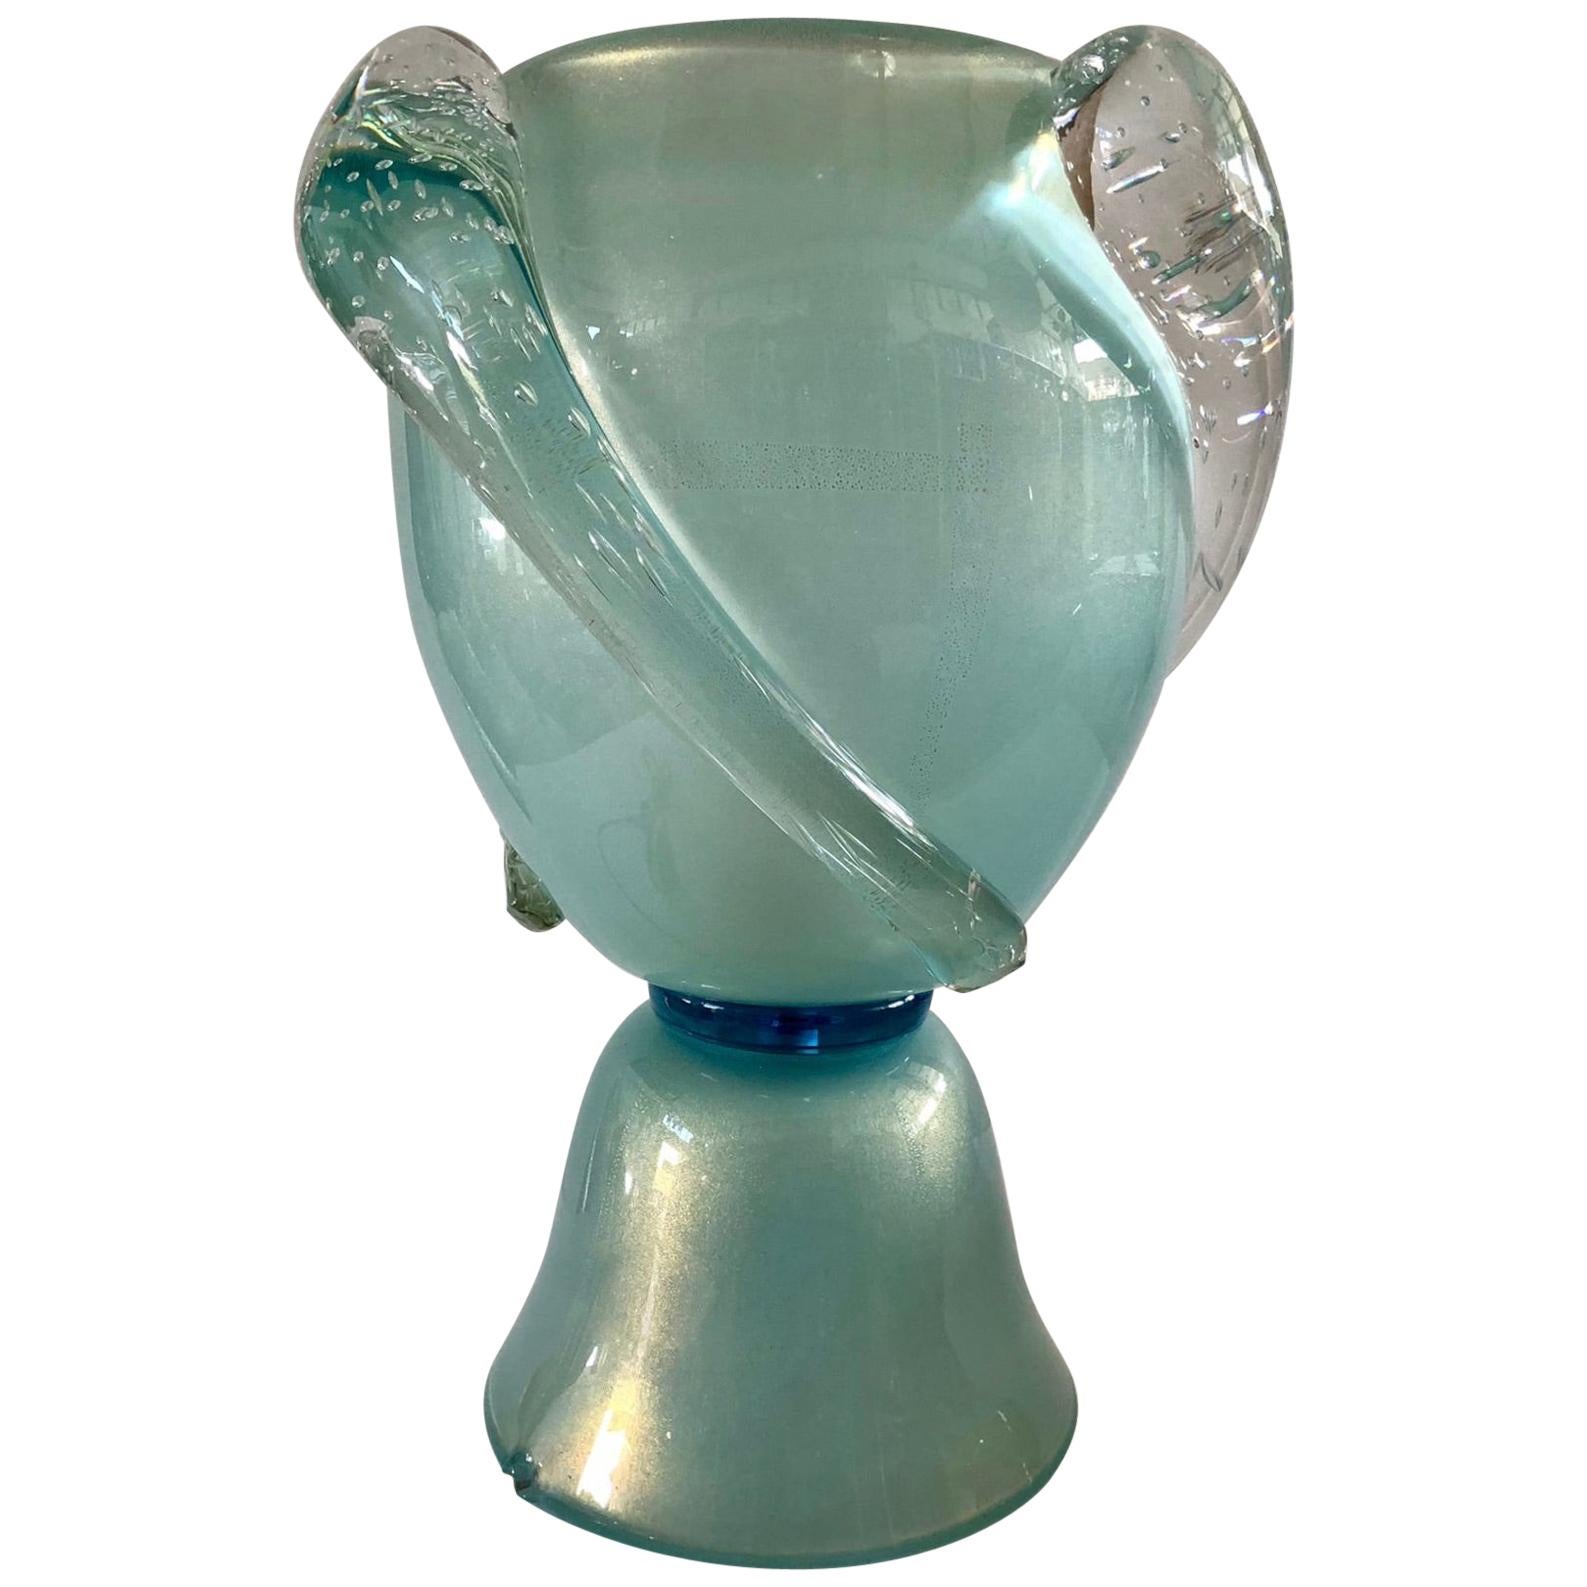 Barovier&Toso Murano Blown Glass turquoise Color Midcentury TableLamp, 1950